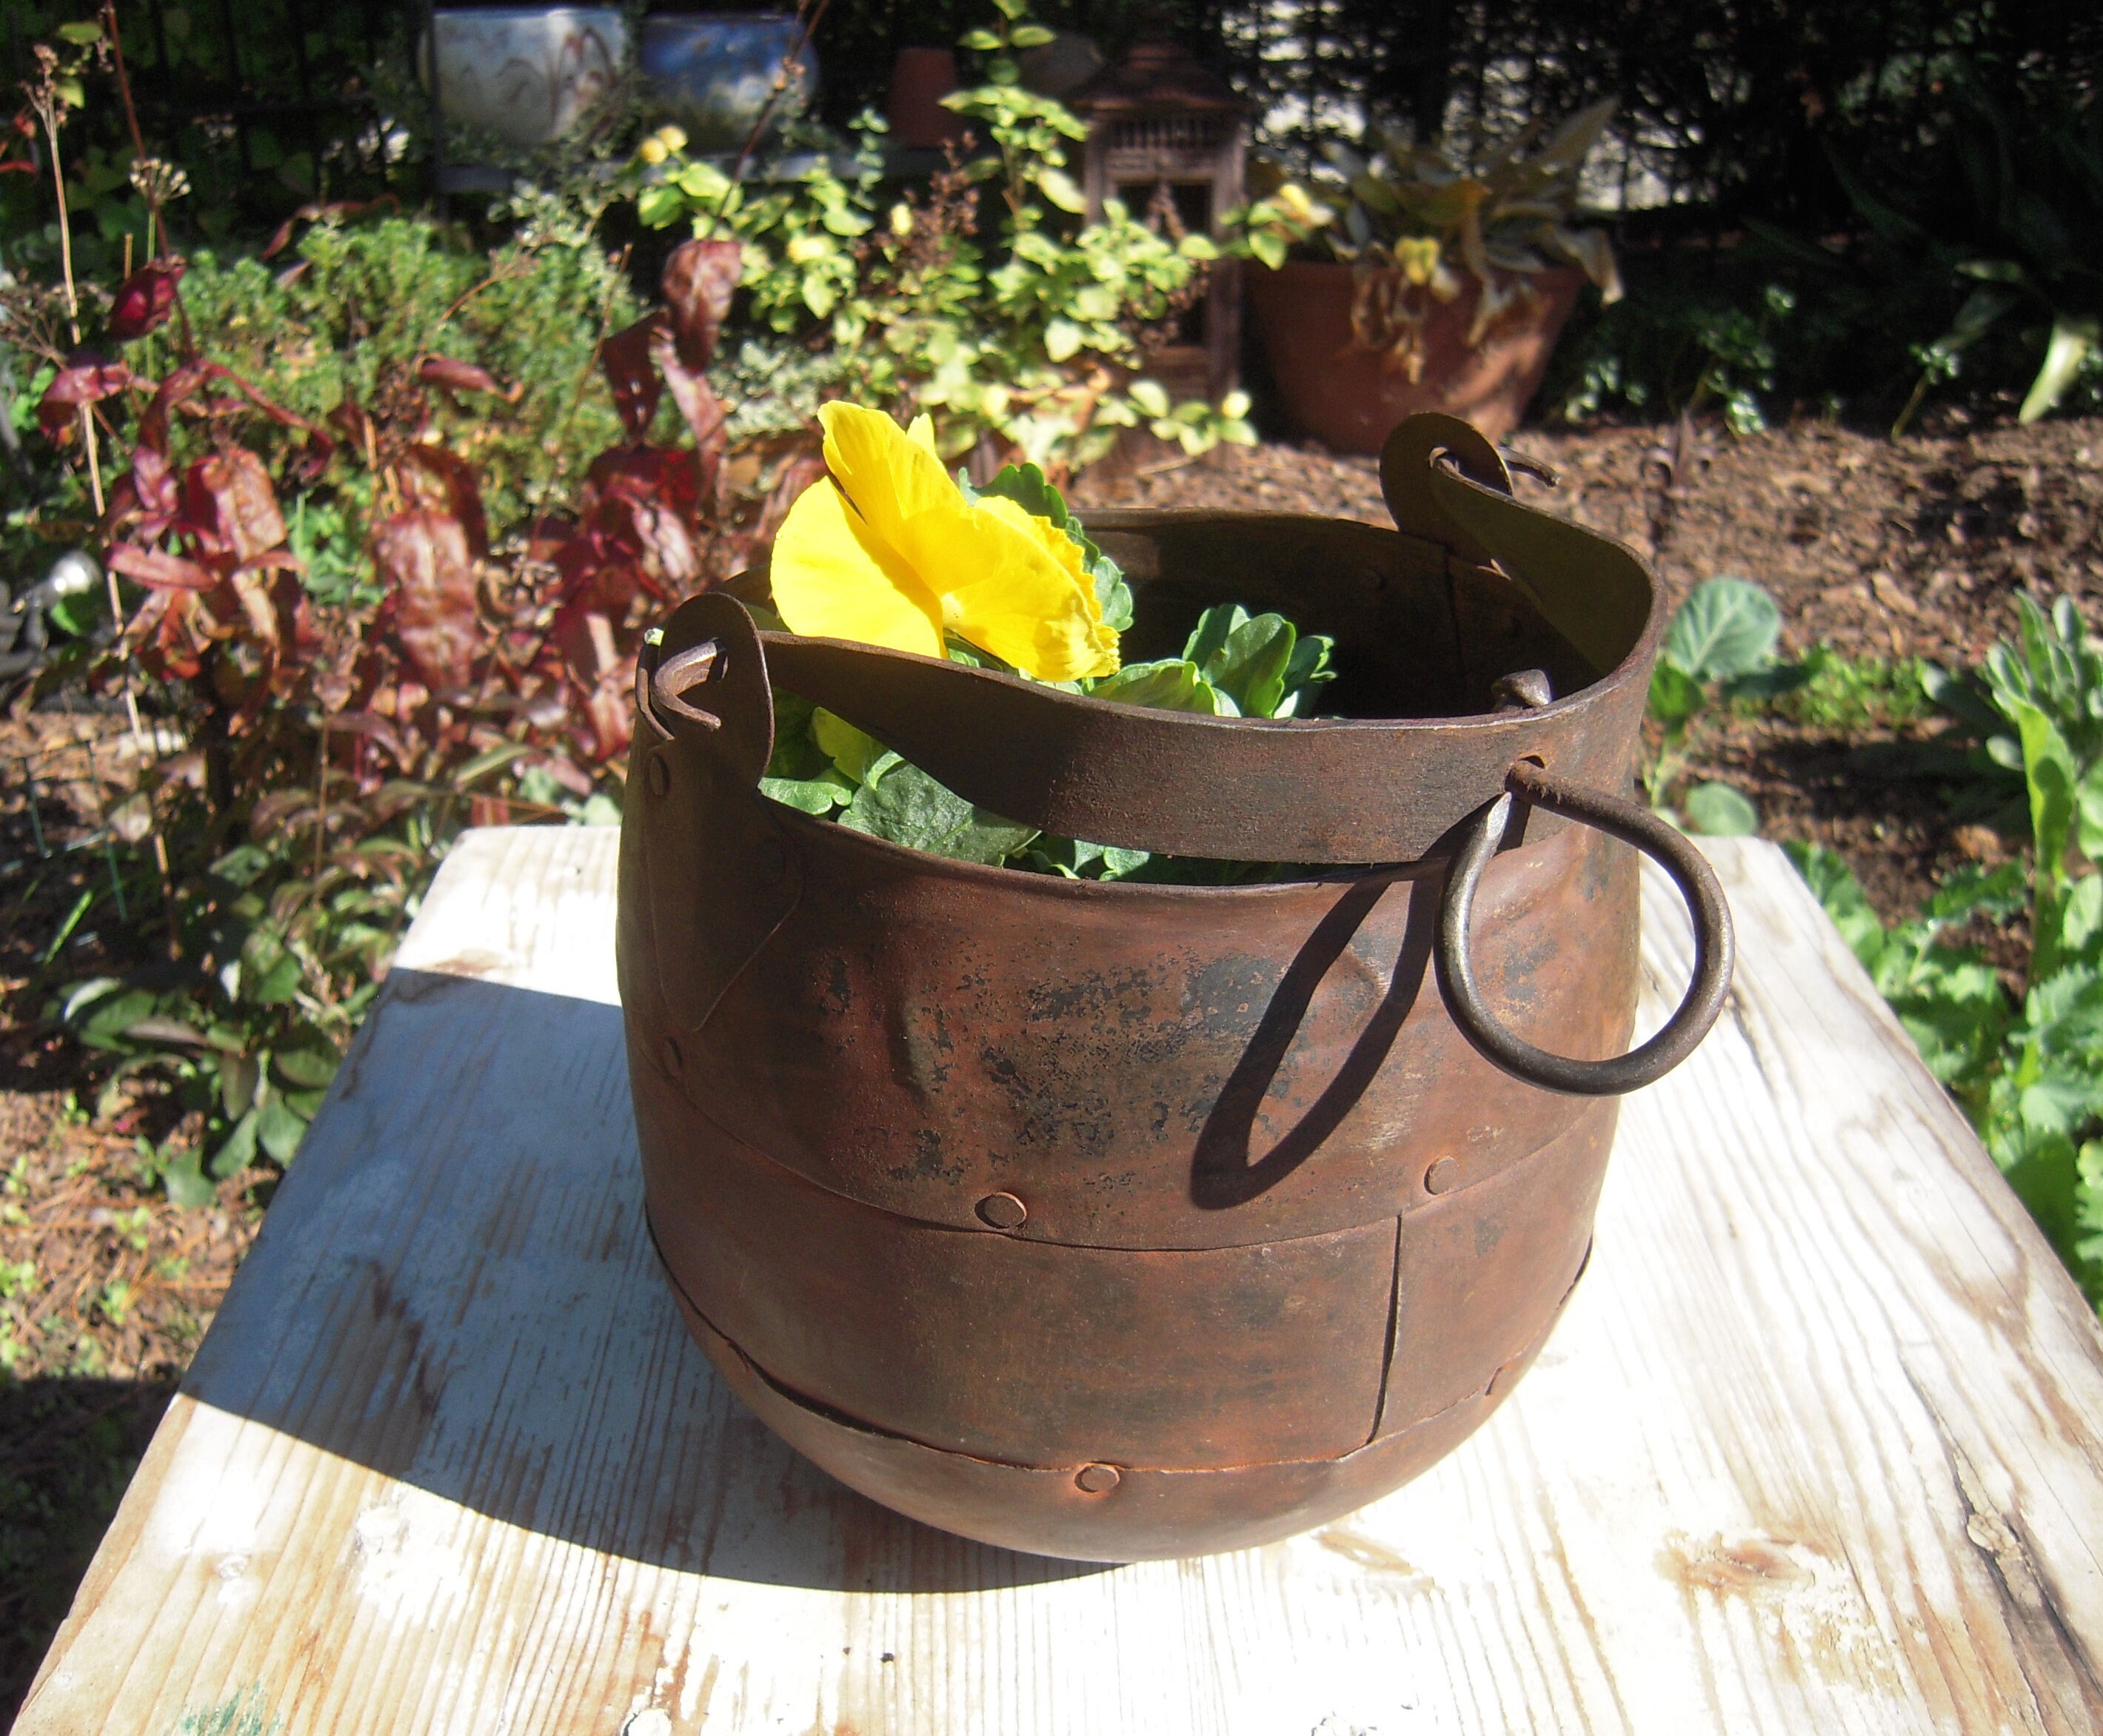 Indian Vintage Small Steel Cooking Pot – Rue Boutique